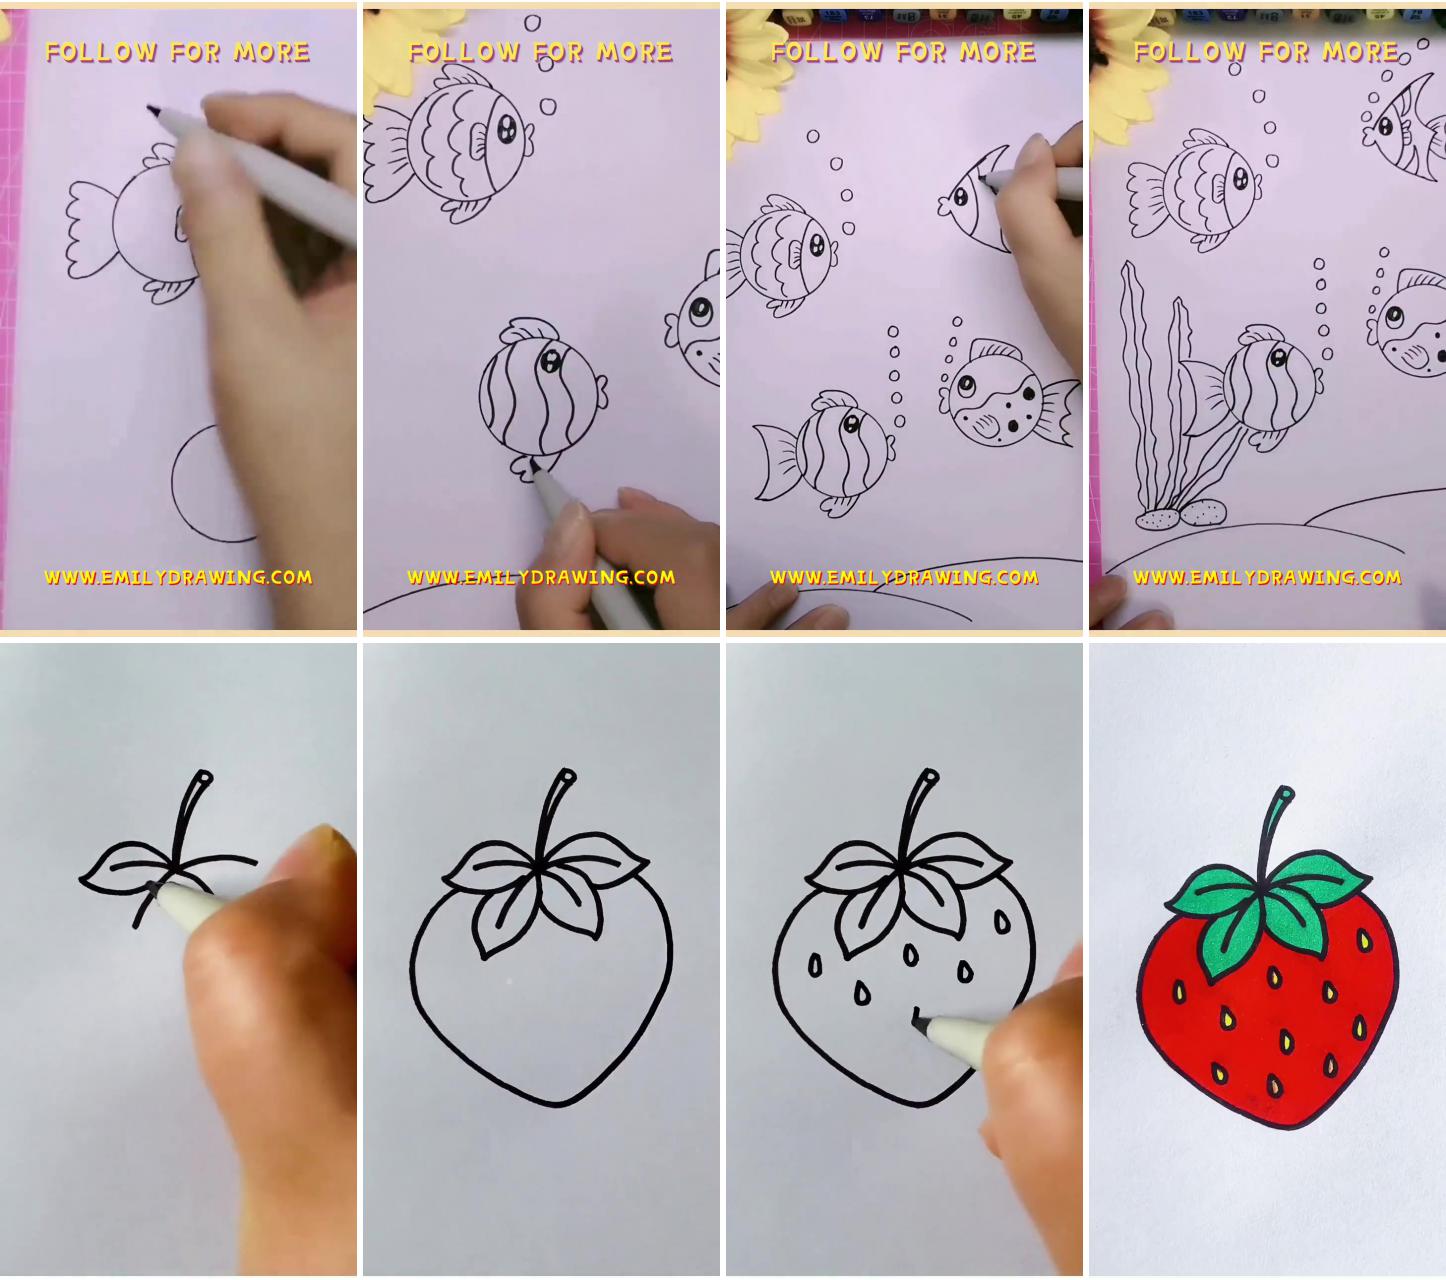 How to draw a fish step by step fish drawing tutorial | how to draw a strawberry: the five best free tutorials